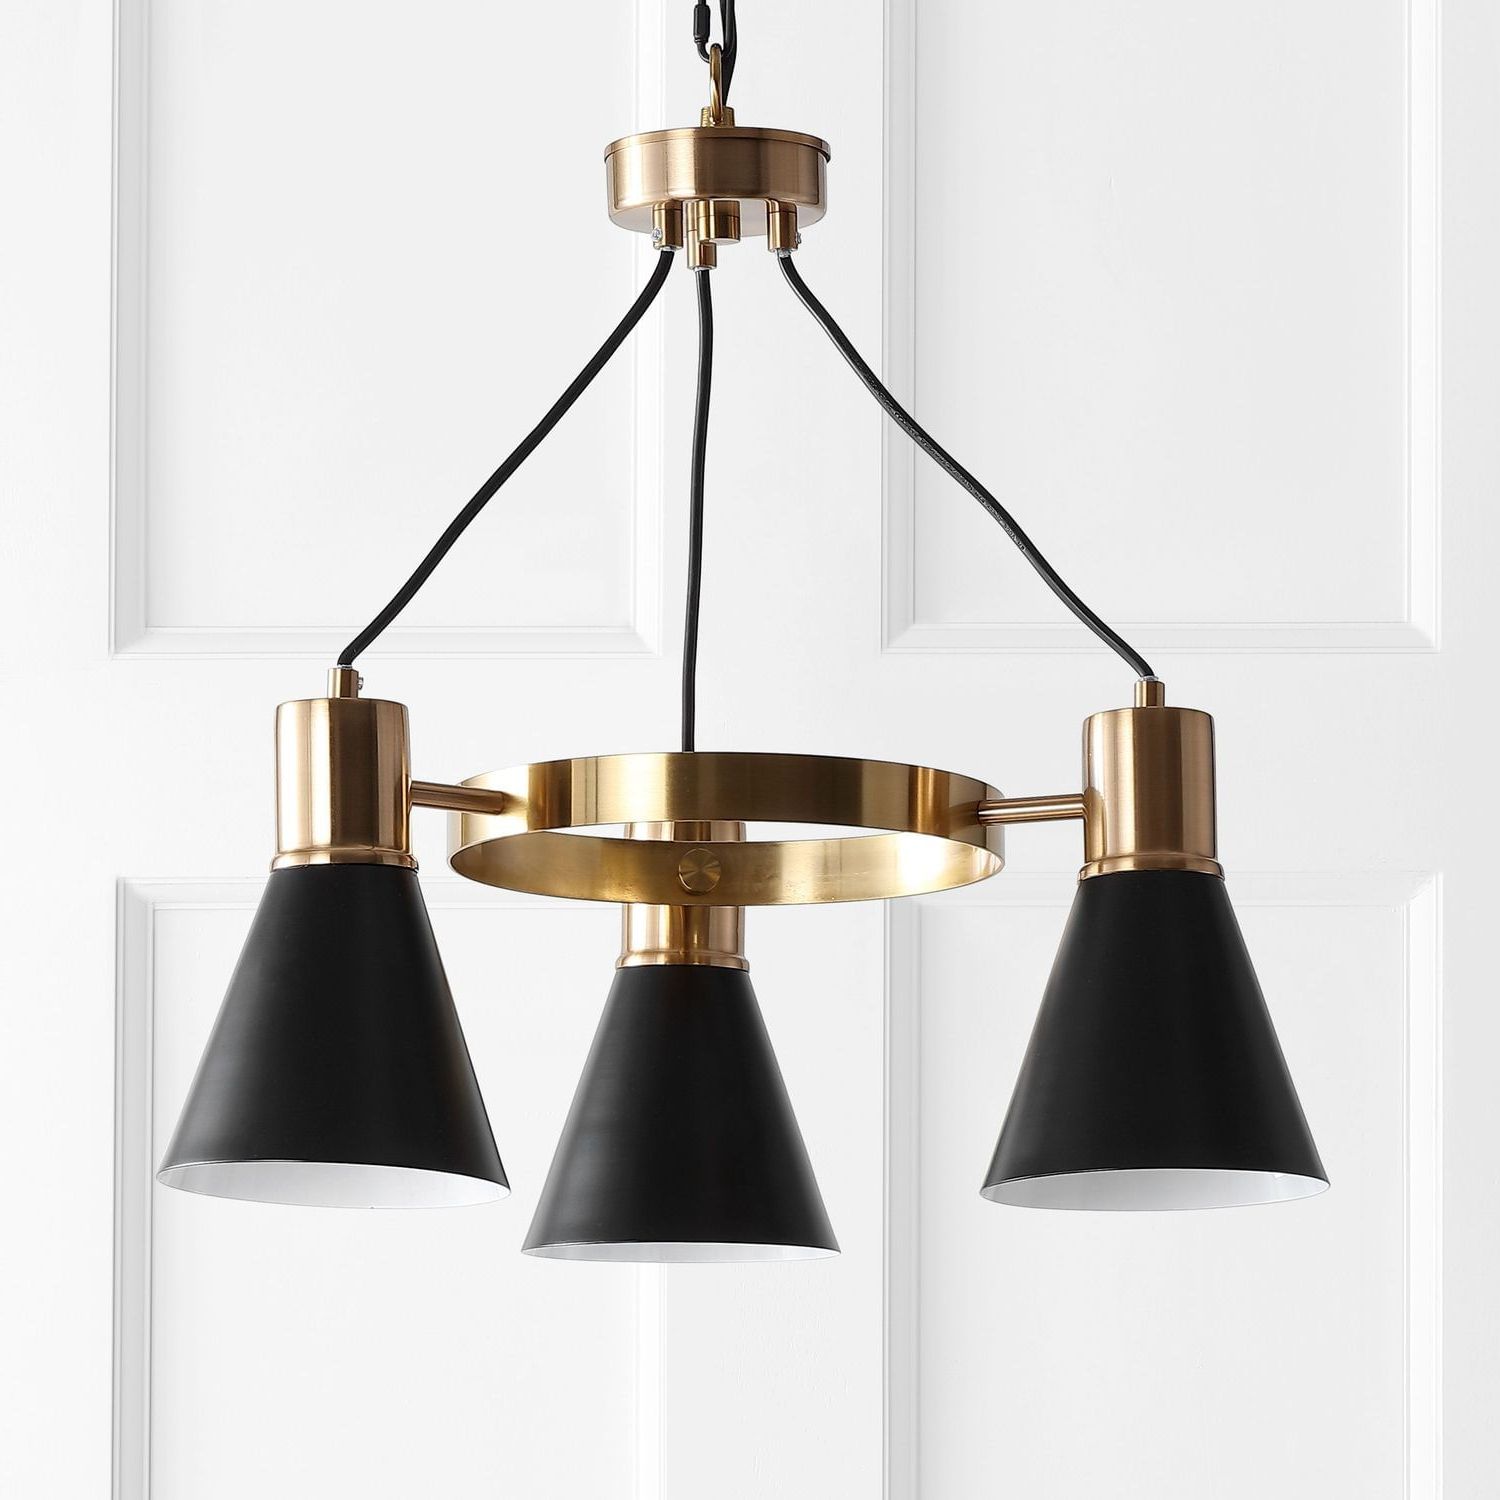 Apollo 22" 3 Light Adjustable Modern Metal Led Task Within Fashionable Brass And Black Led Island Pendant (View 13 of 20)